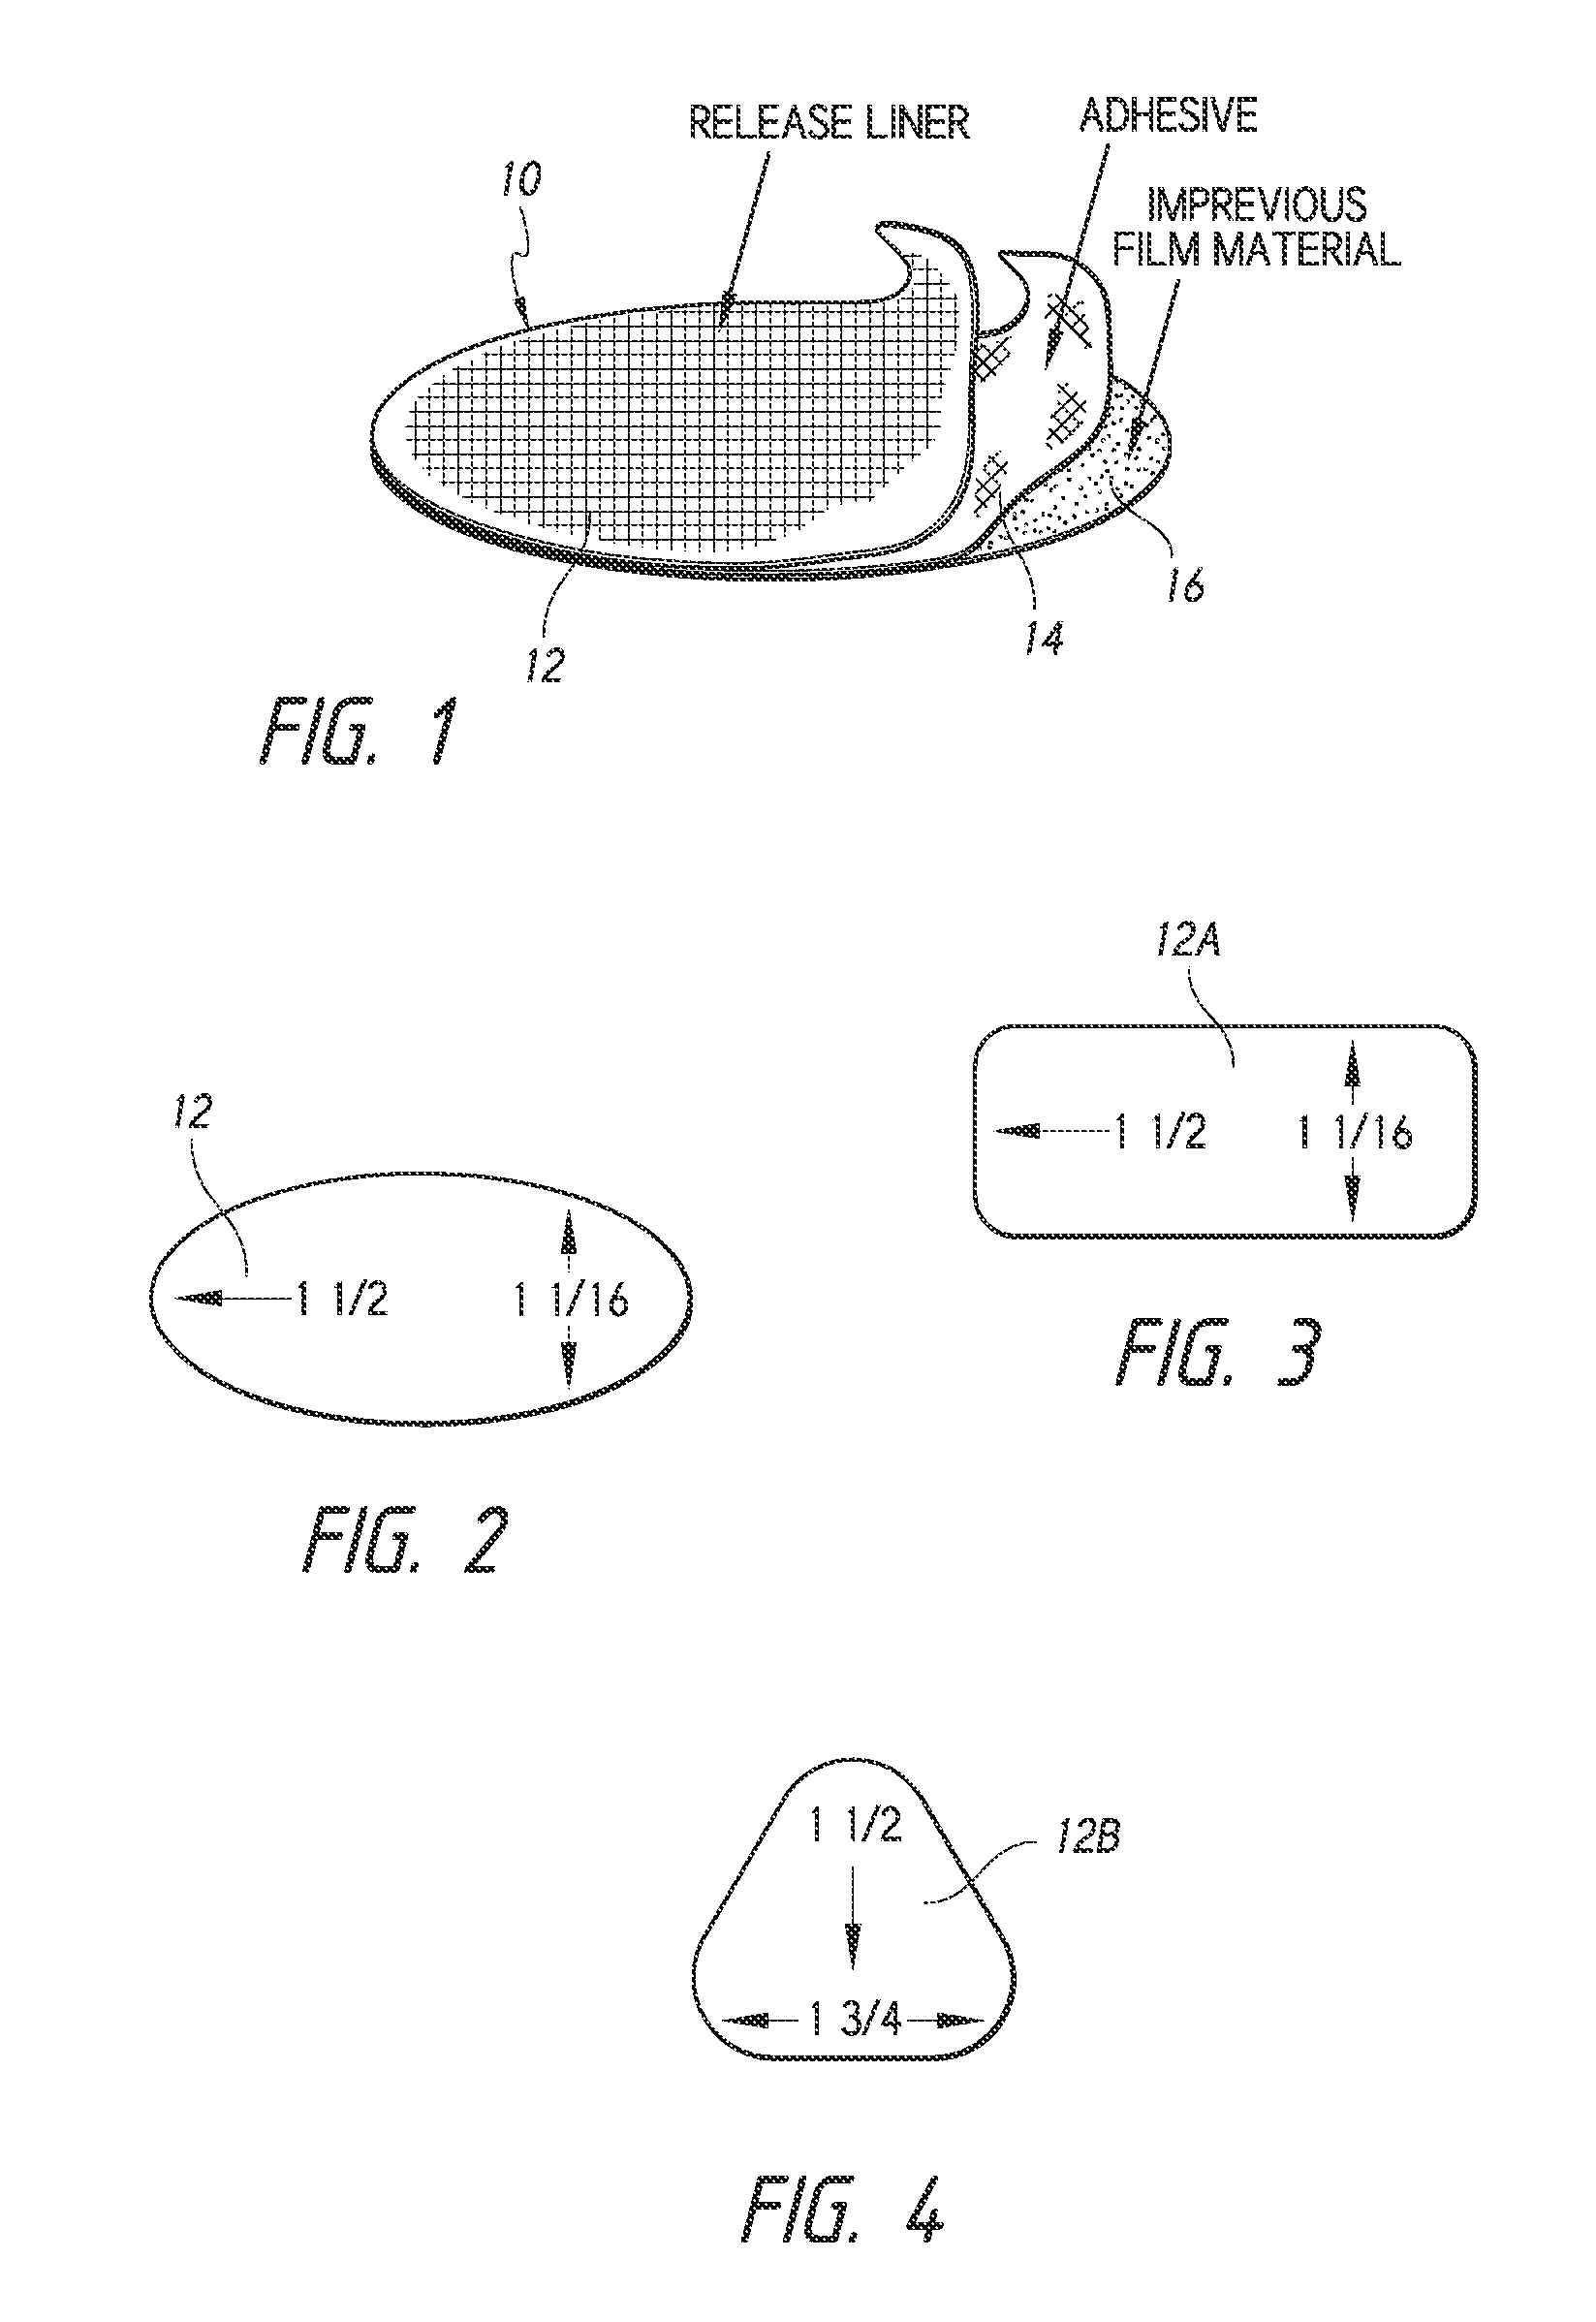 Systems and methods for treating female incontinence and pelvic nerve dysfunction